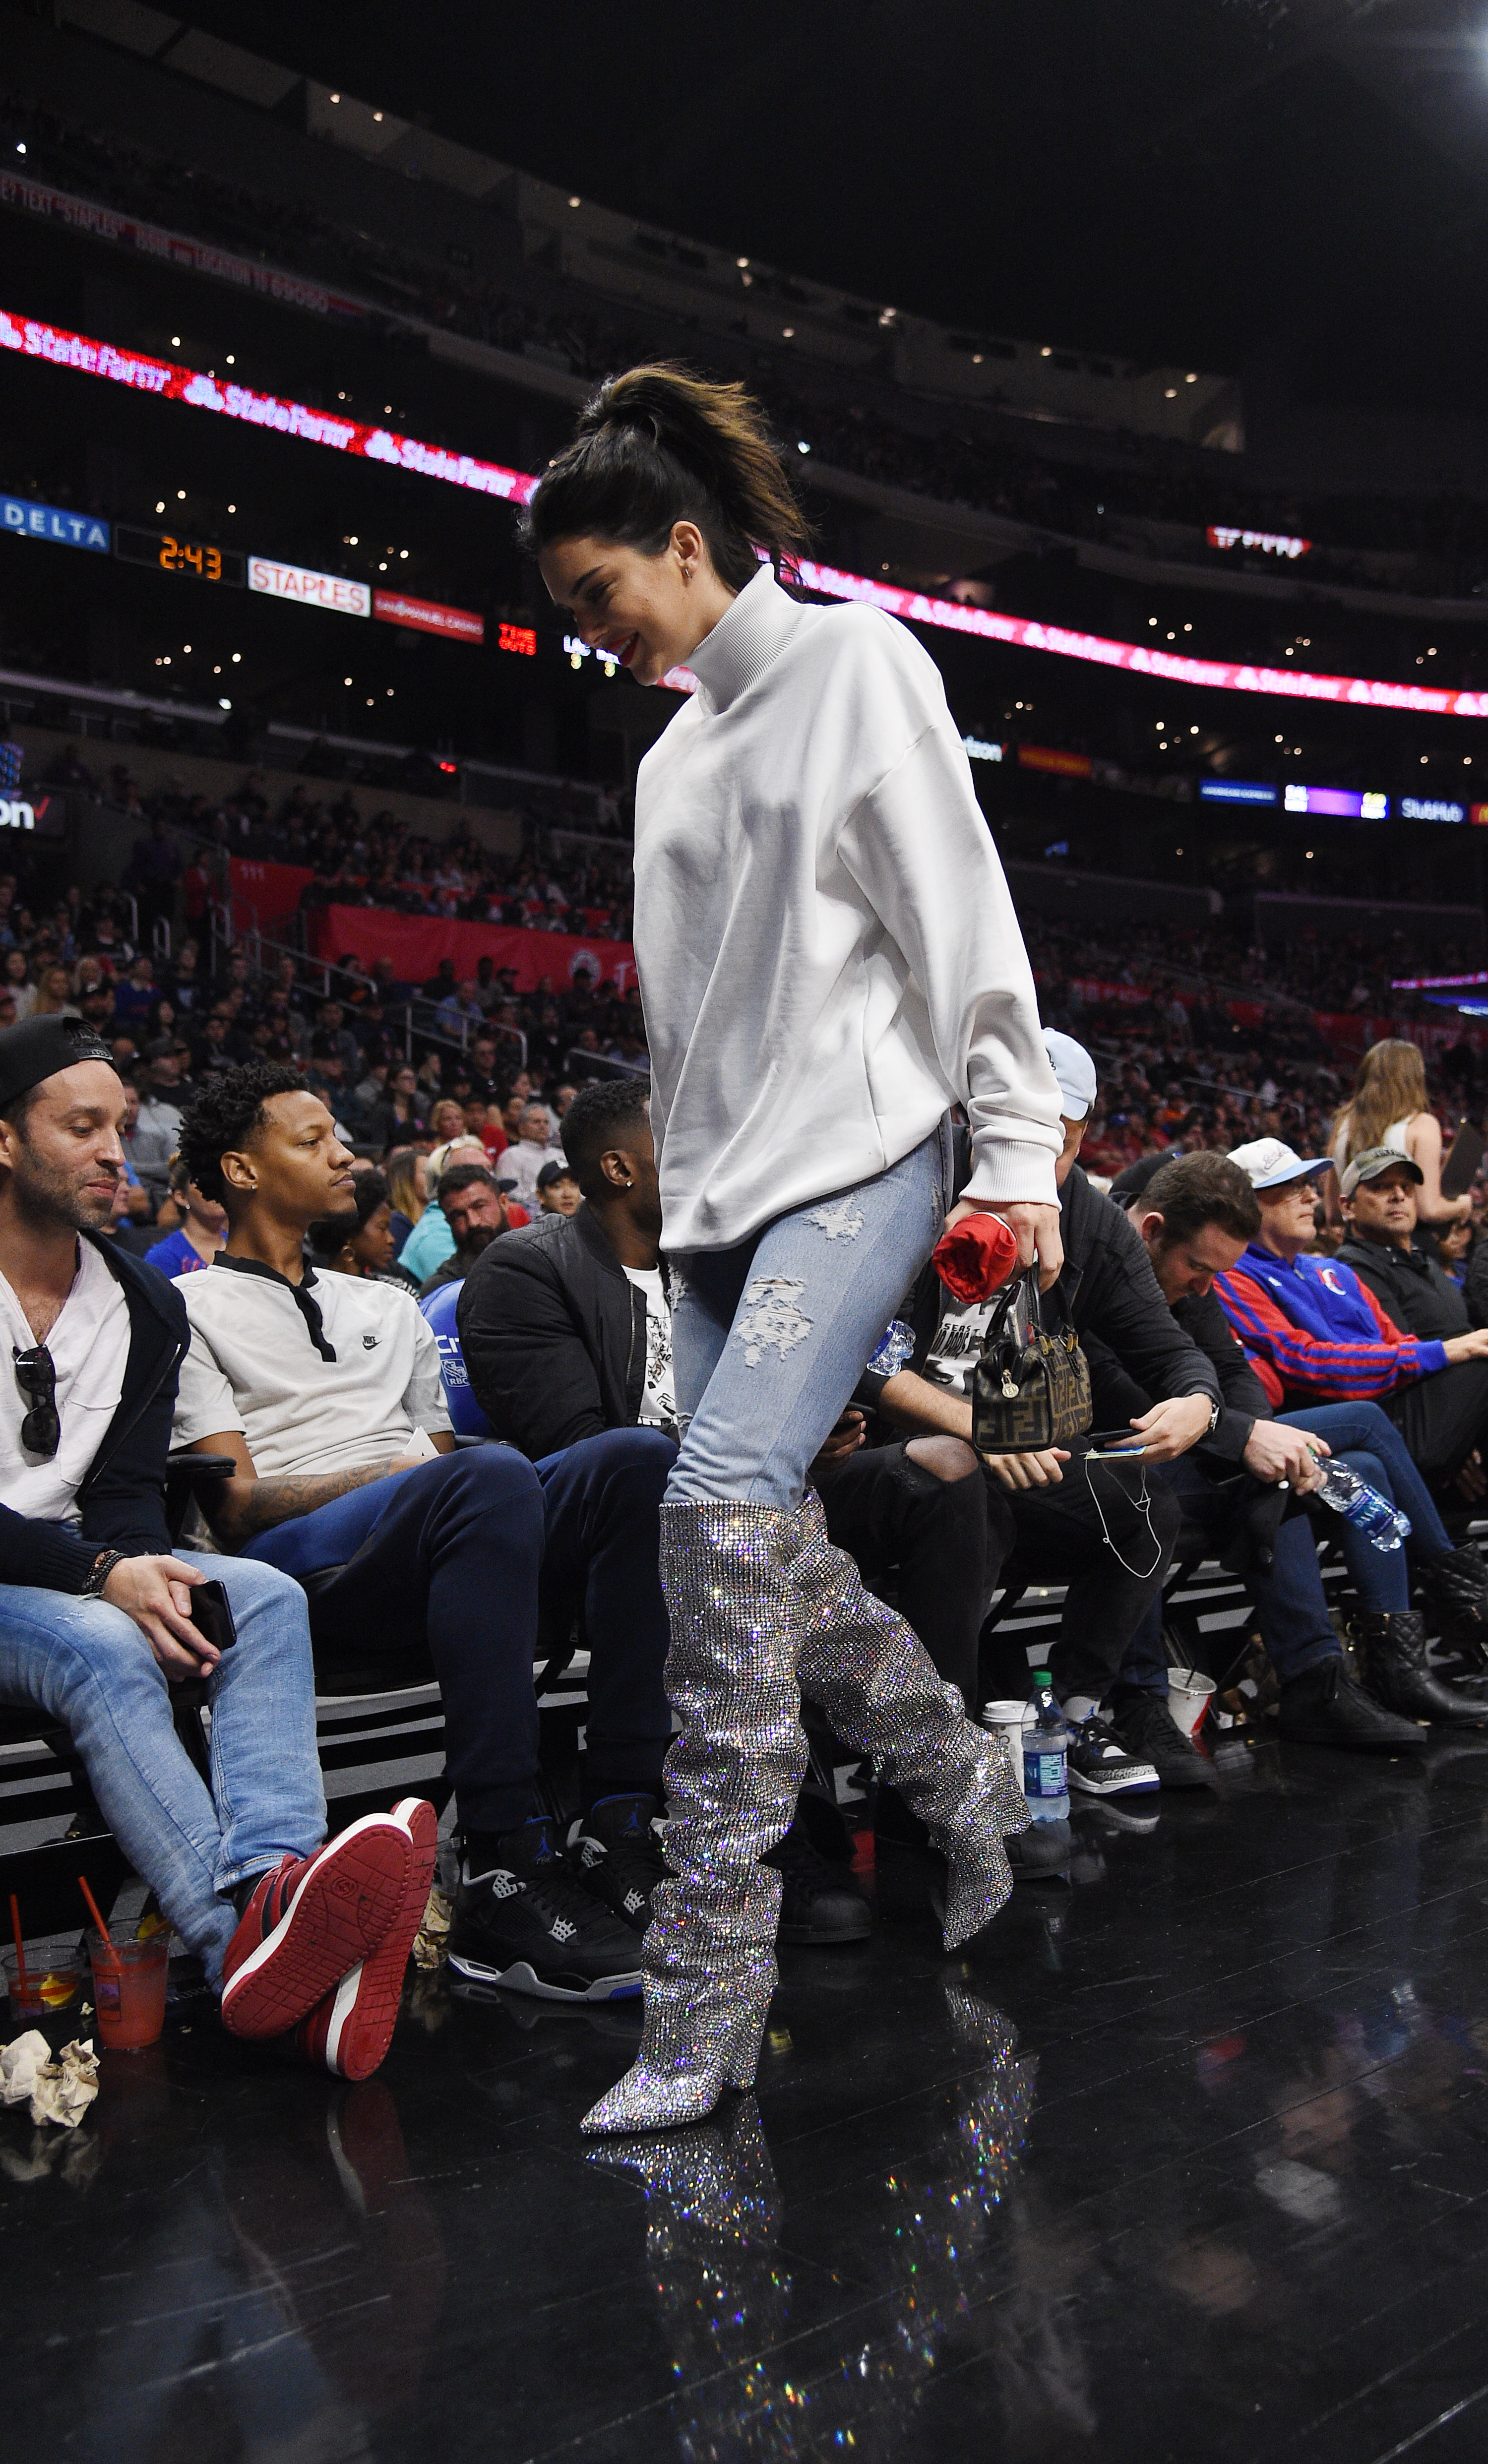 LOS ANGELES, CA - NOVEMBER 4: Kendall Jenner wearing a pair of $10,000 Saint Laurent boots attends the LA Clippers and Memphis Grizzlies basketball game at Staples Center November 4 2017, in Los Angeles, California. (Photo by Kevork Djansezian/Getty Images)